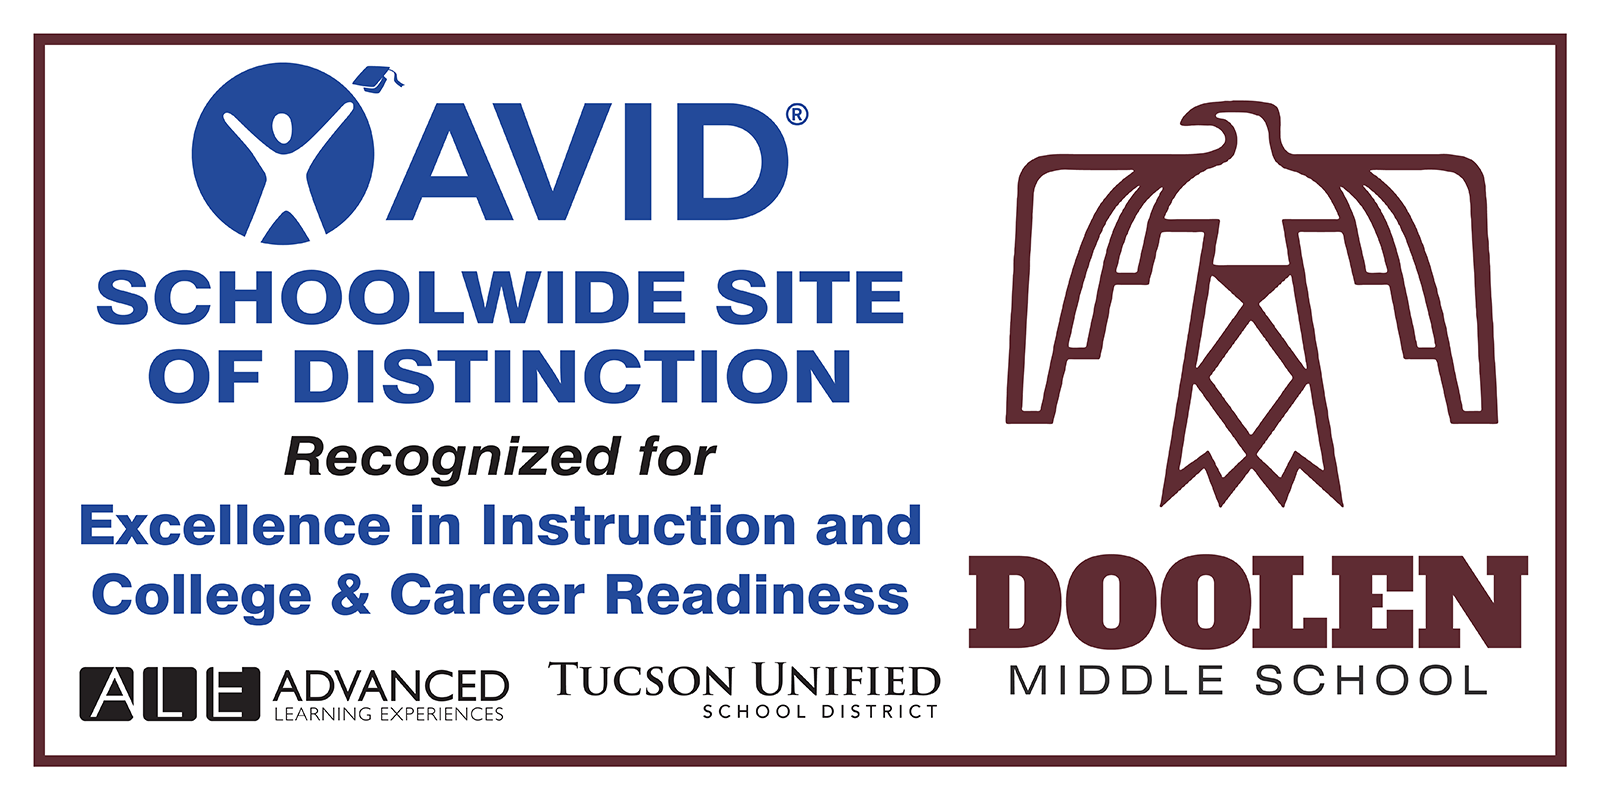 Doolen - Schoolwide Site of Distinction, Excellence in Instruction and College & Career Readiness